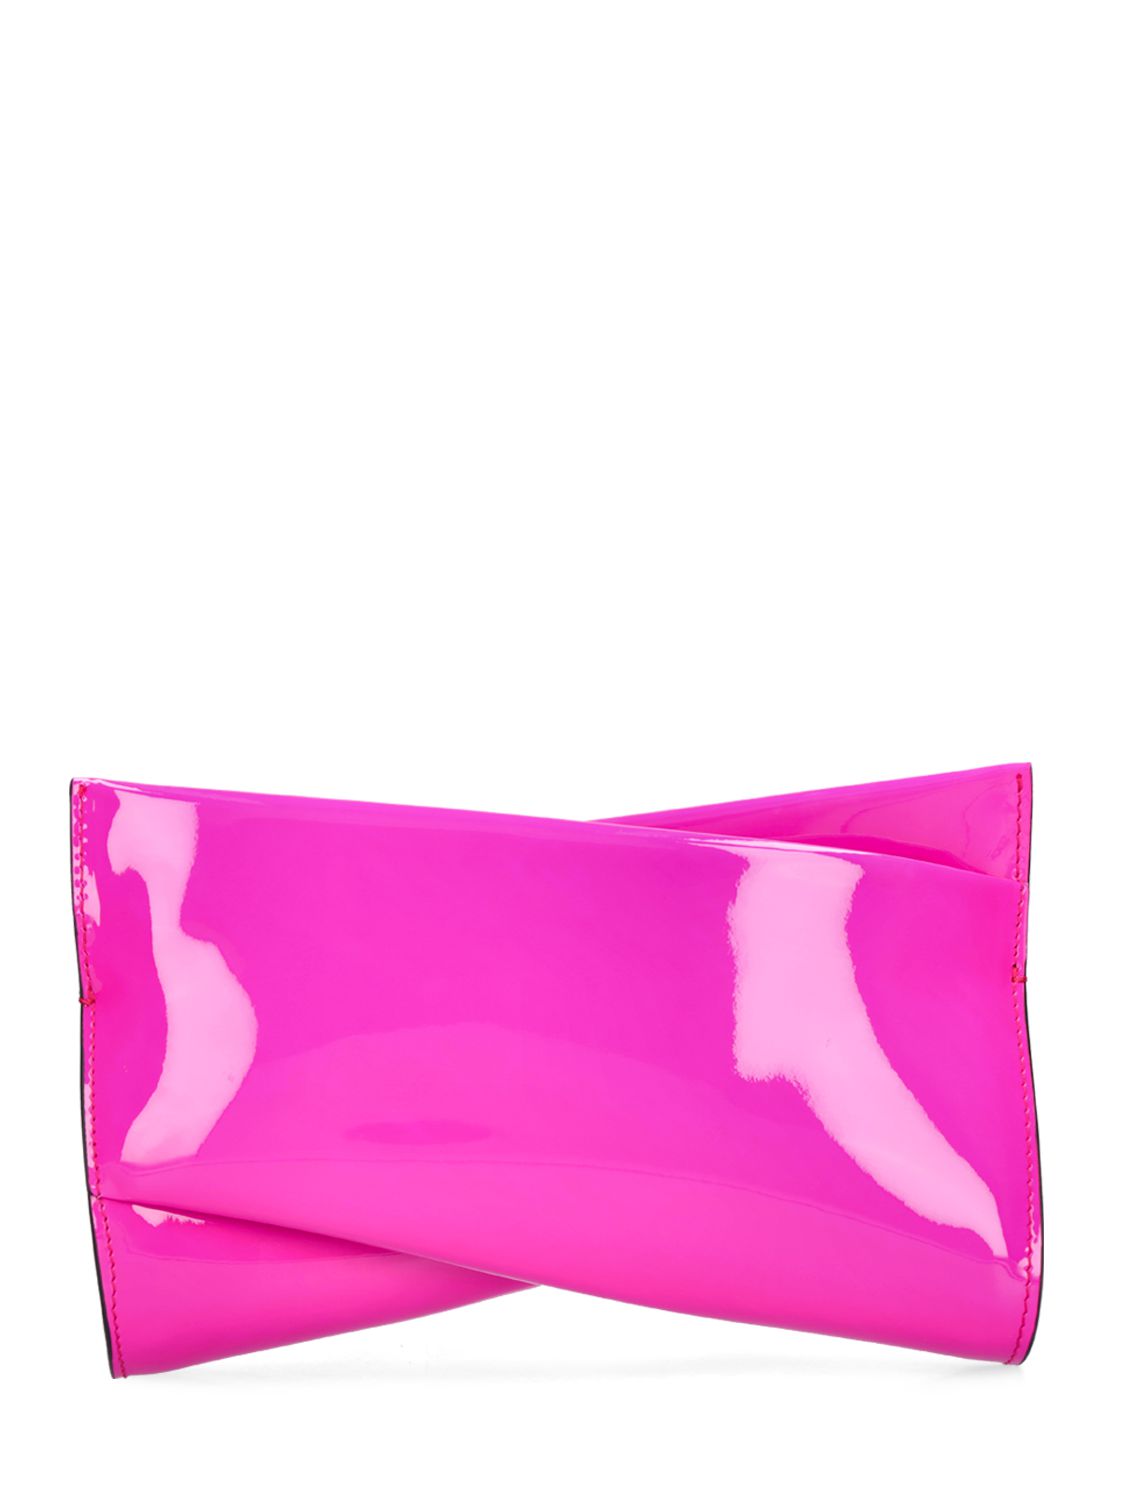 Small Loubitwist Patent Leather Clutch